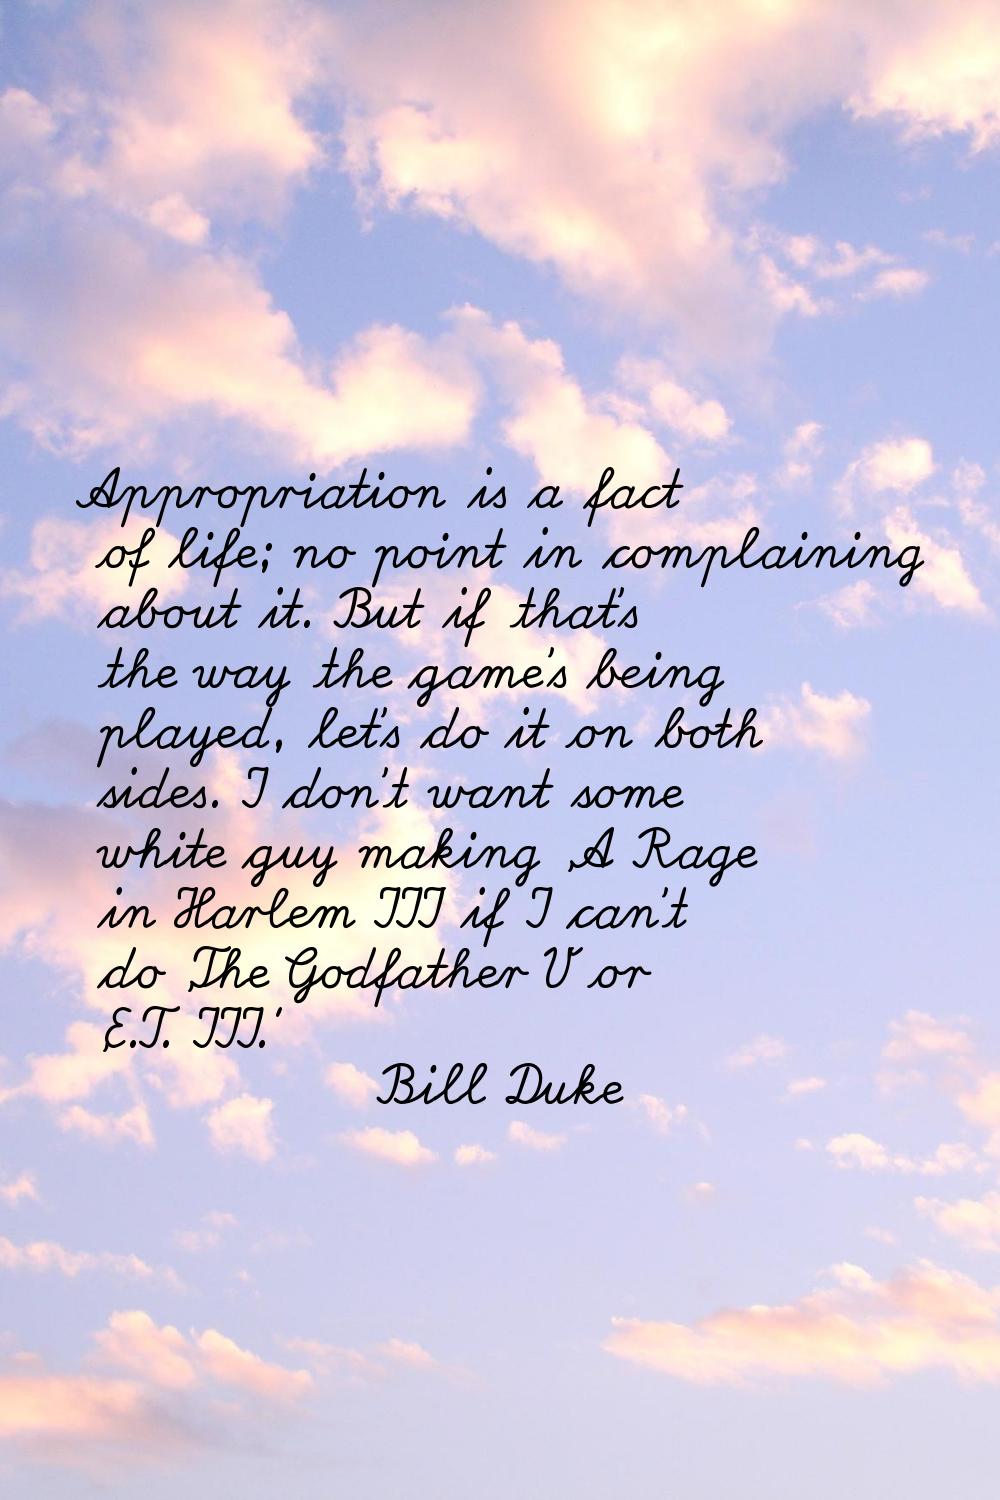 Appropriation is a fact of life; no point in complaining about it. But if that's the way the game's